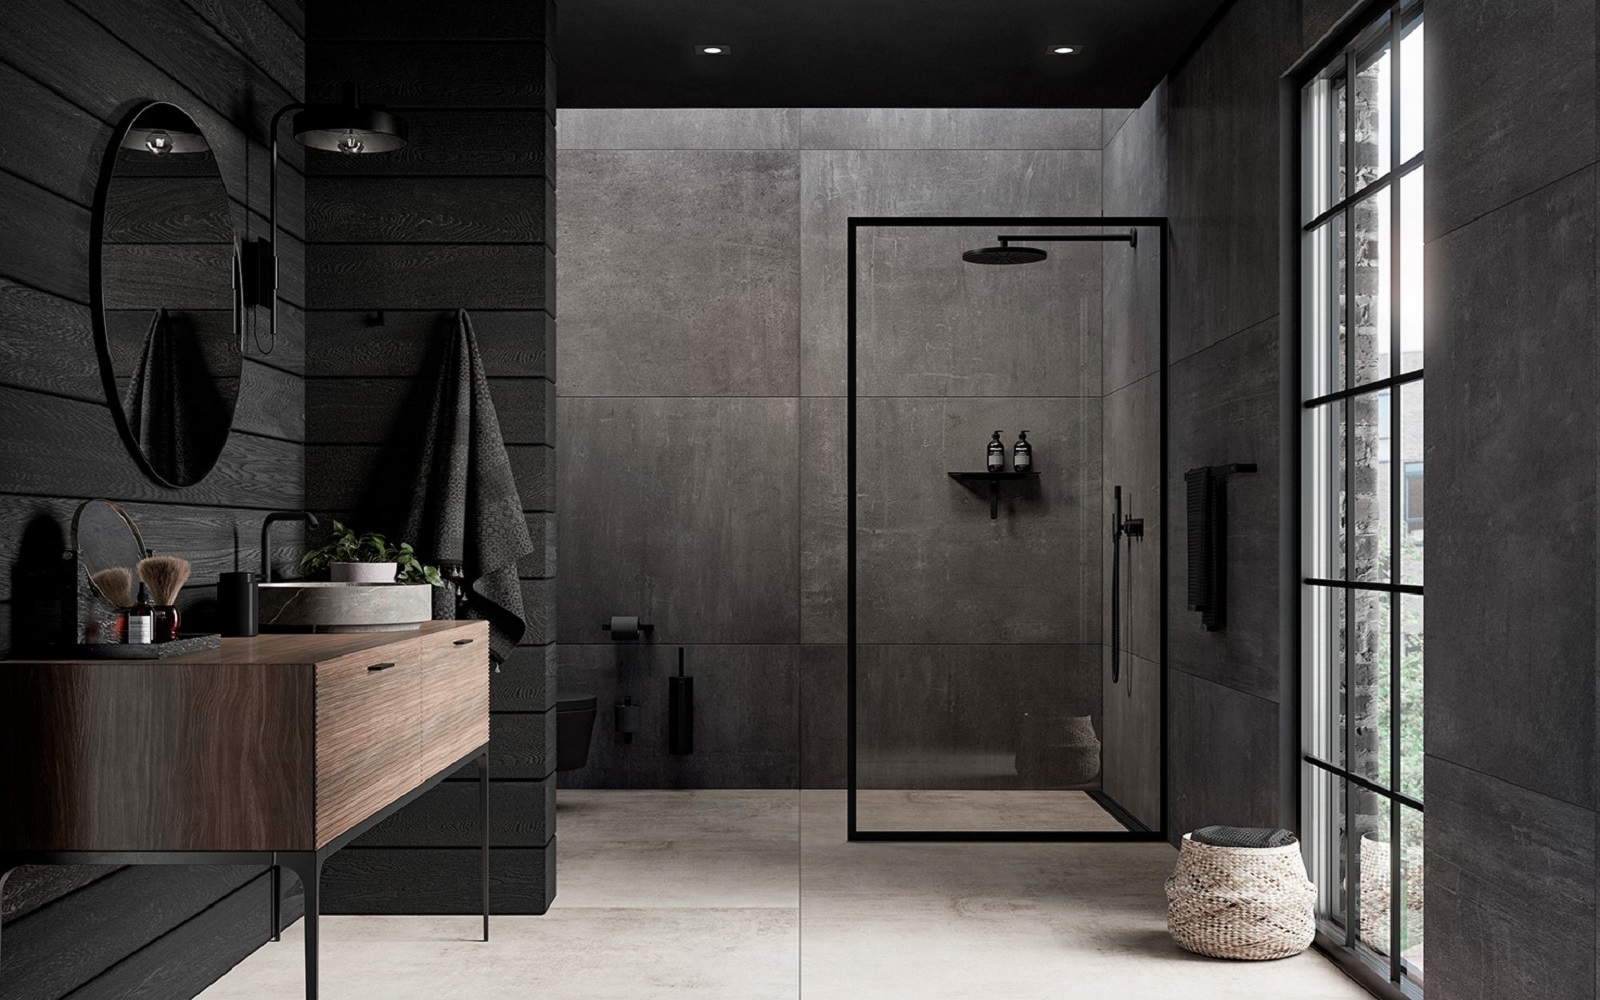 Unidrain fittings in an industrial style bathroom with black details